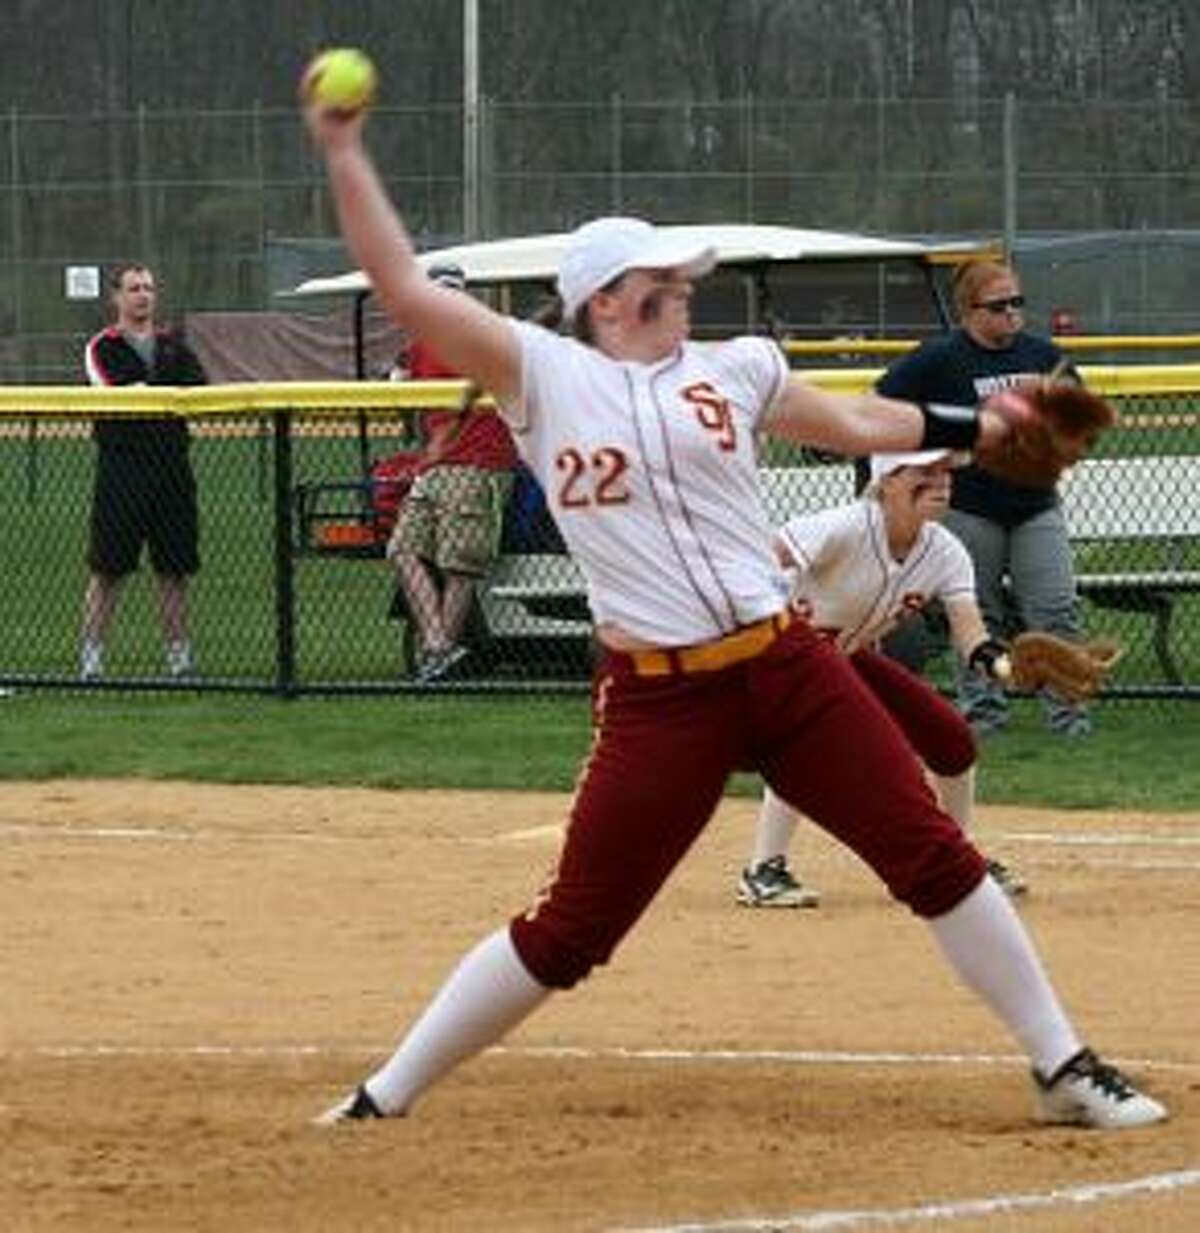 Nicole Williams struck out 14 of the 15 batters she faced in pitching her gem. — Bill Bloxsom photo